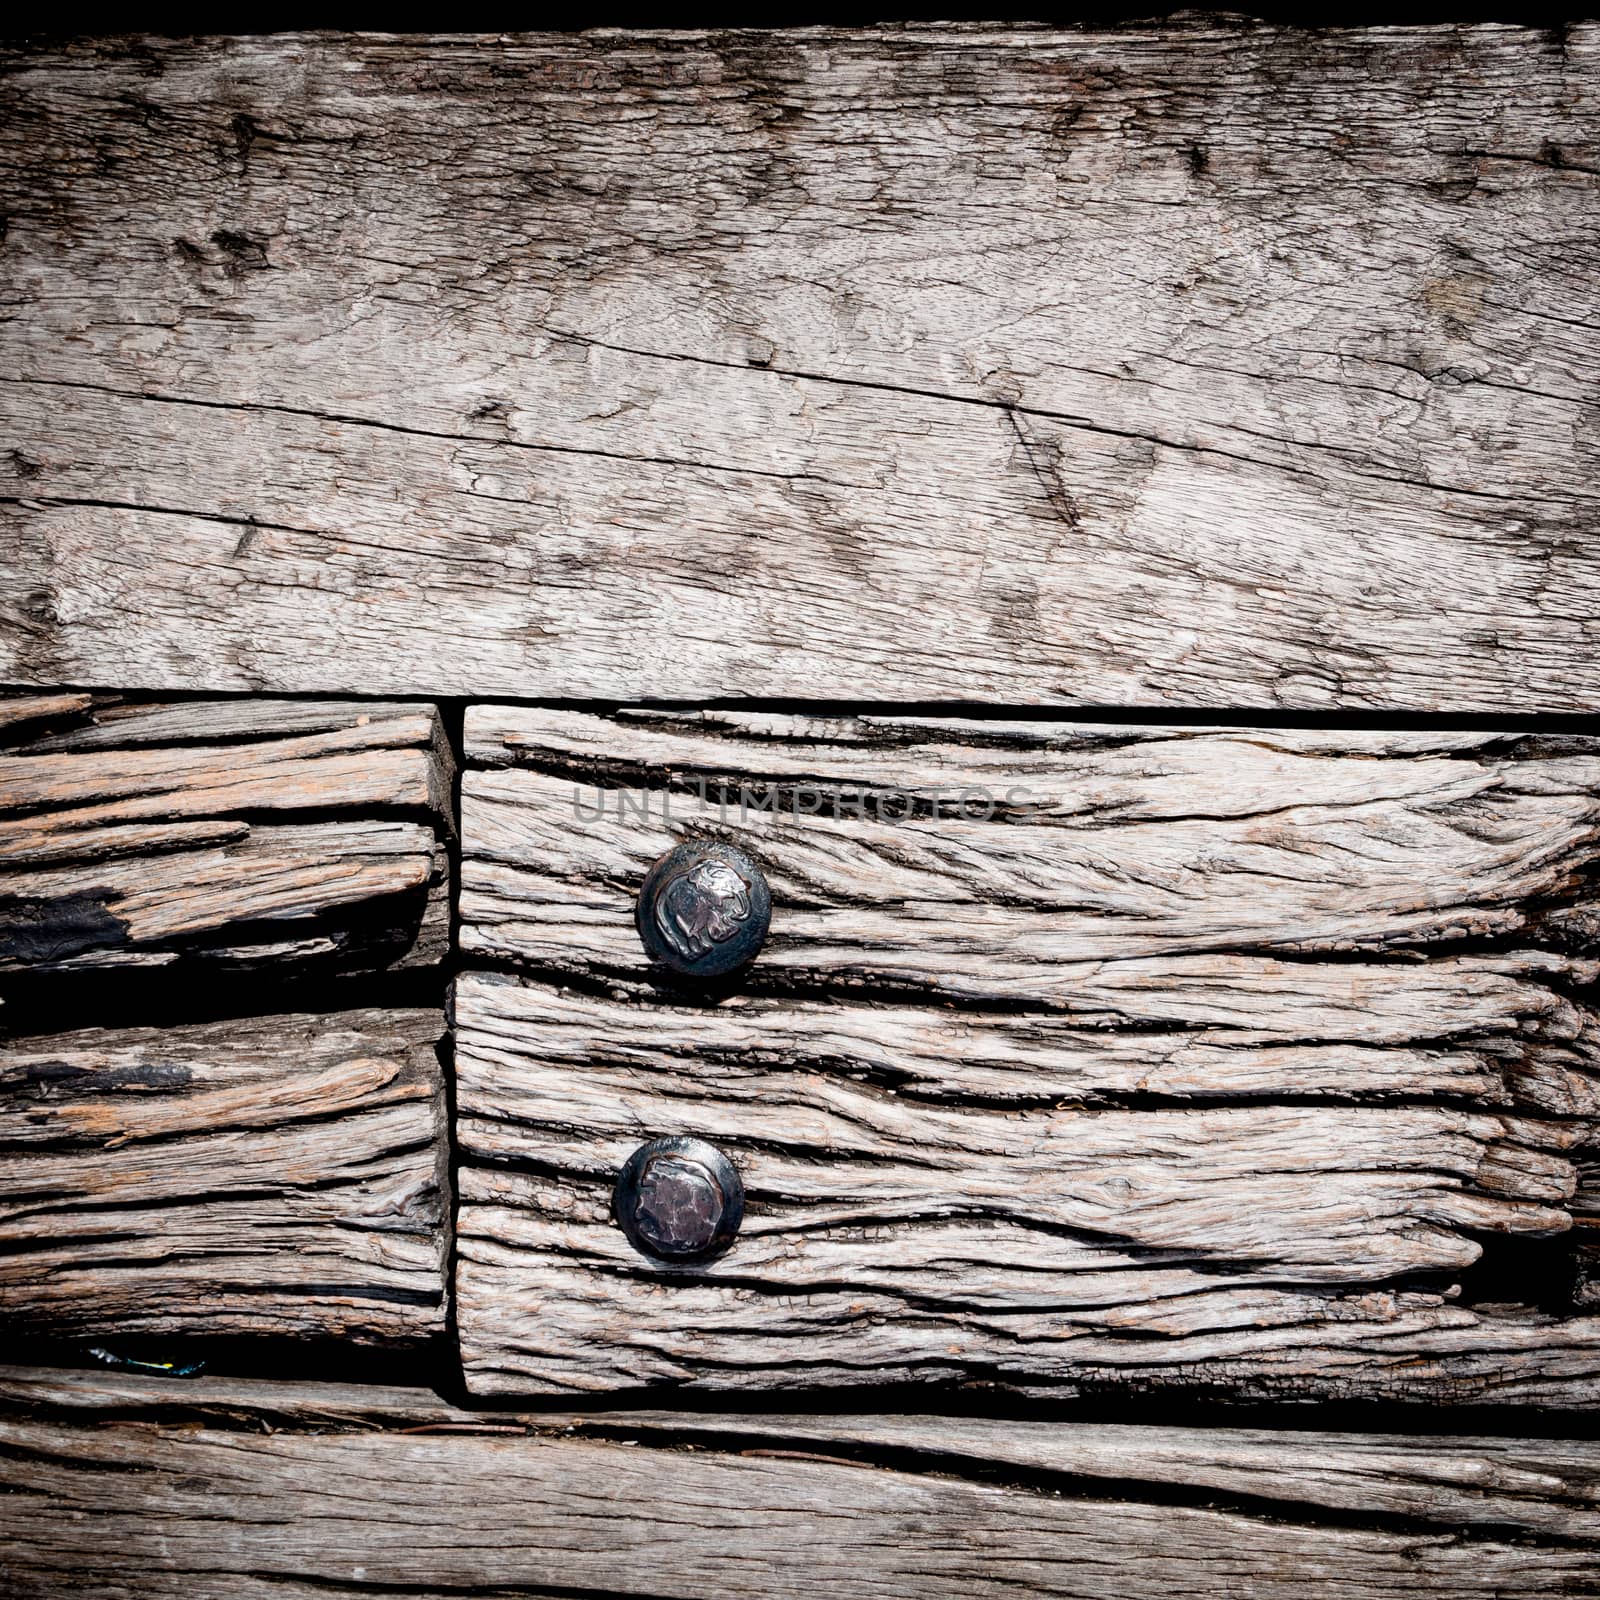 close up of wood texture use as natural background